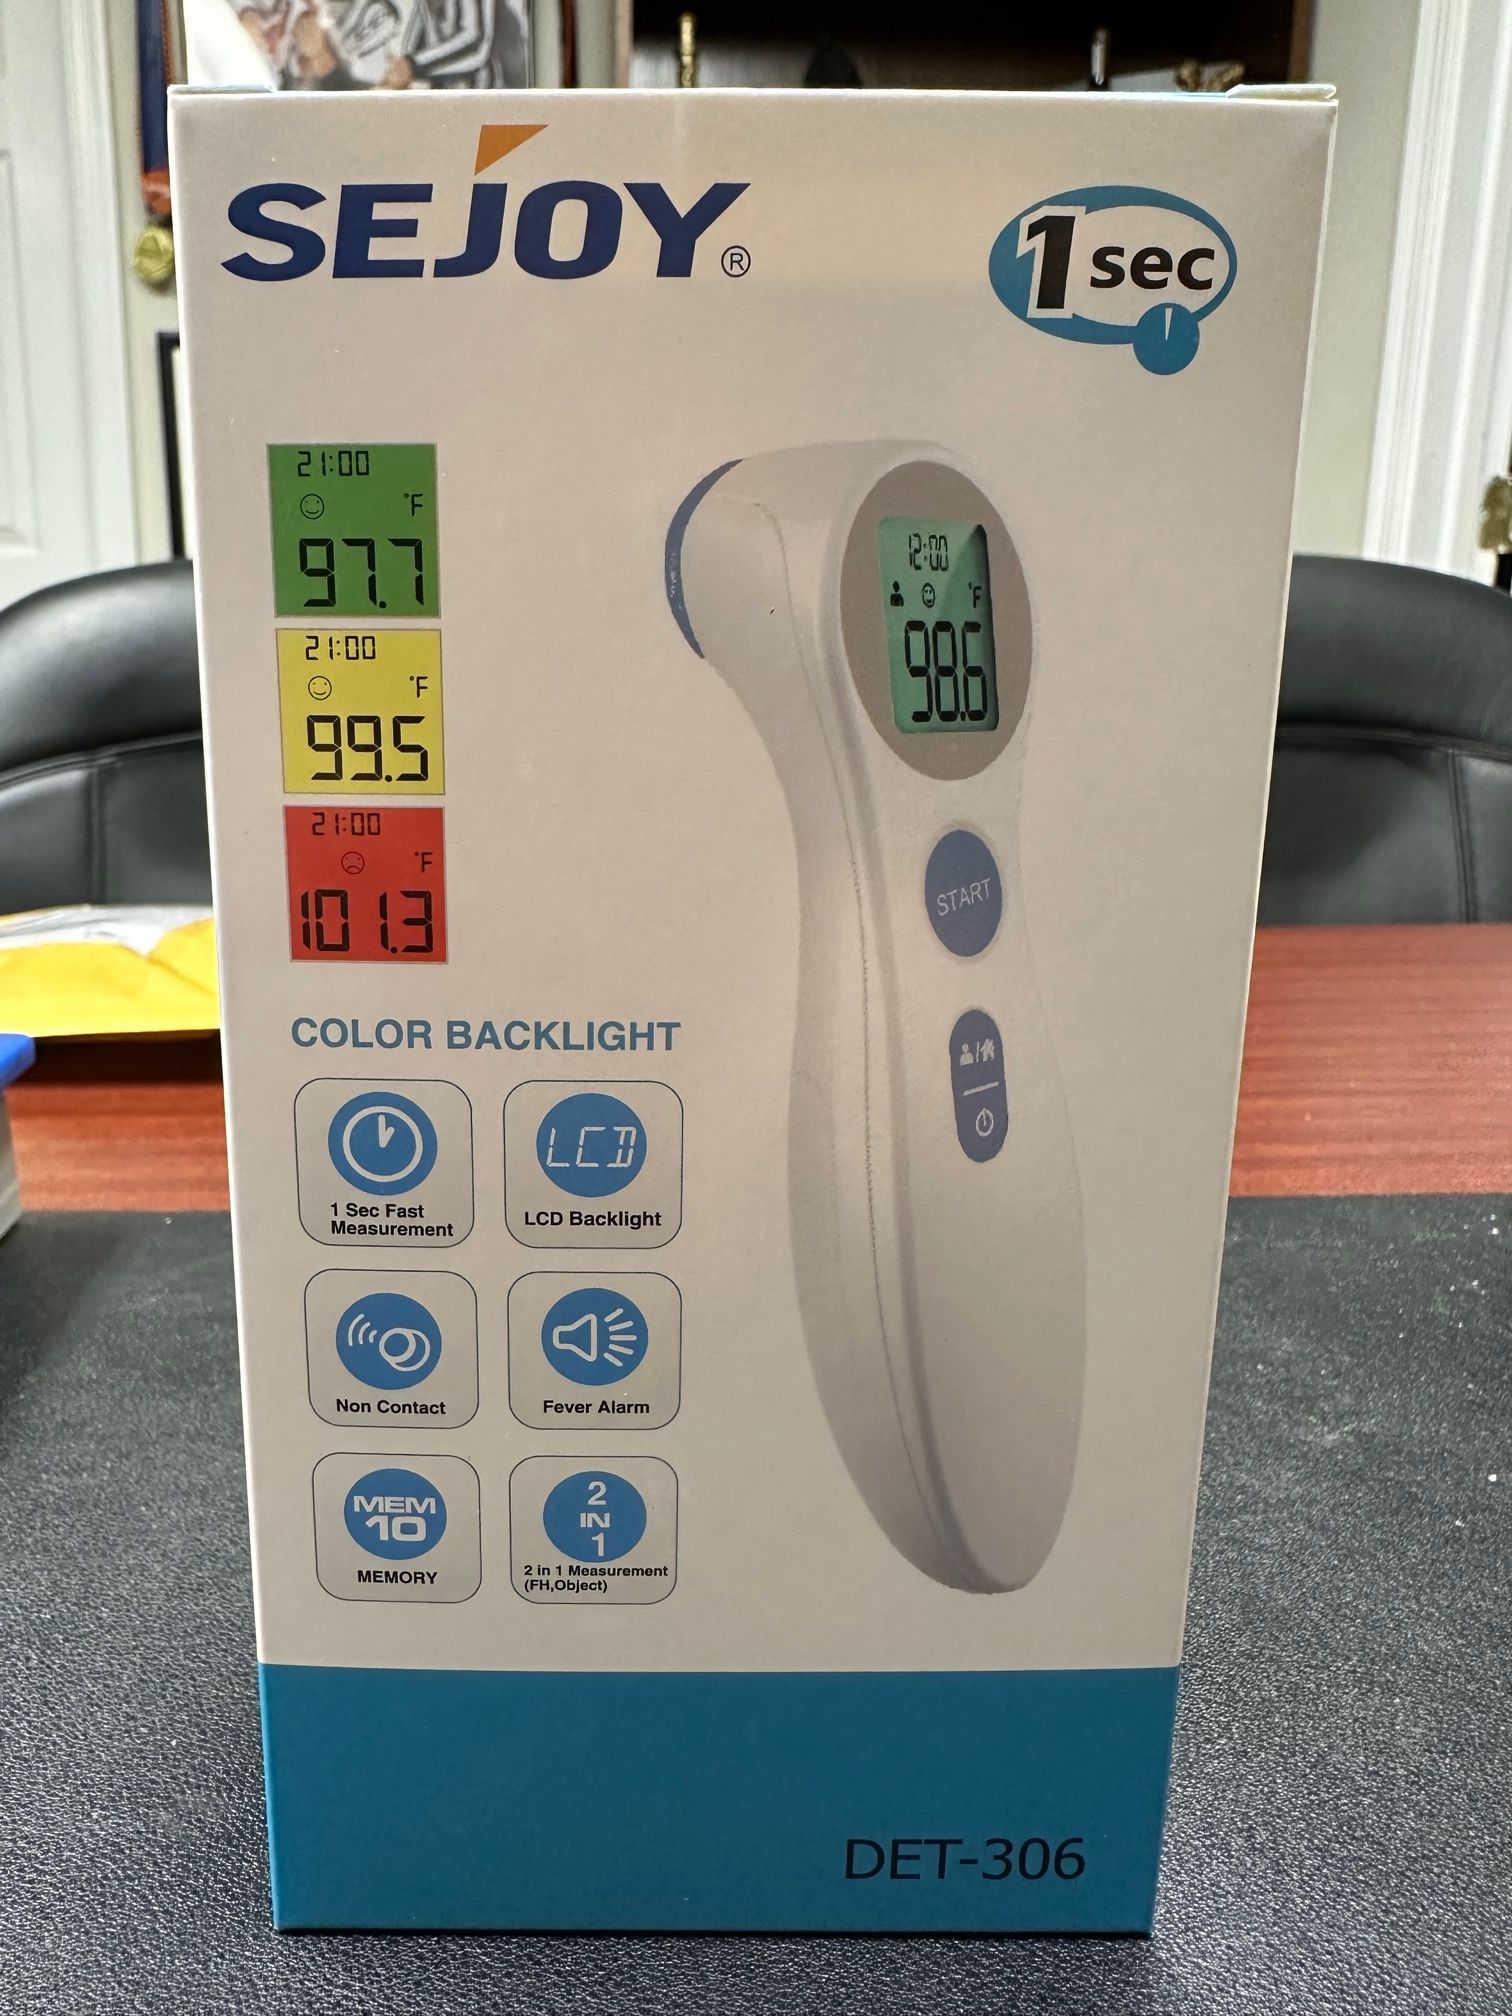 Easy@Home 3 in 1 Non-Contact Infrared Forehead Thermometer (US Stock)